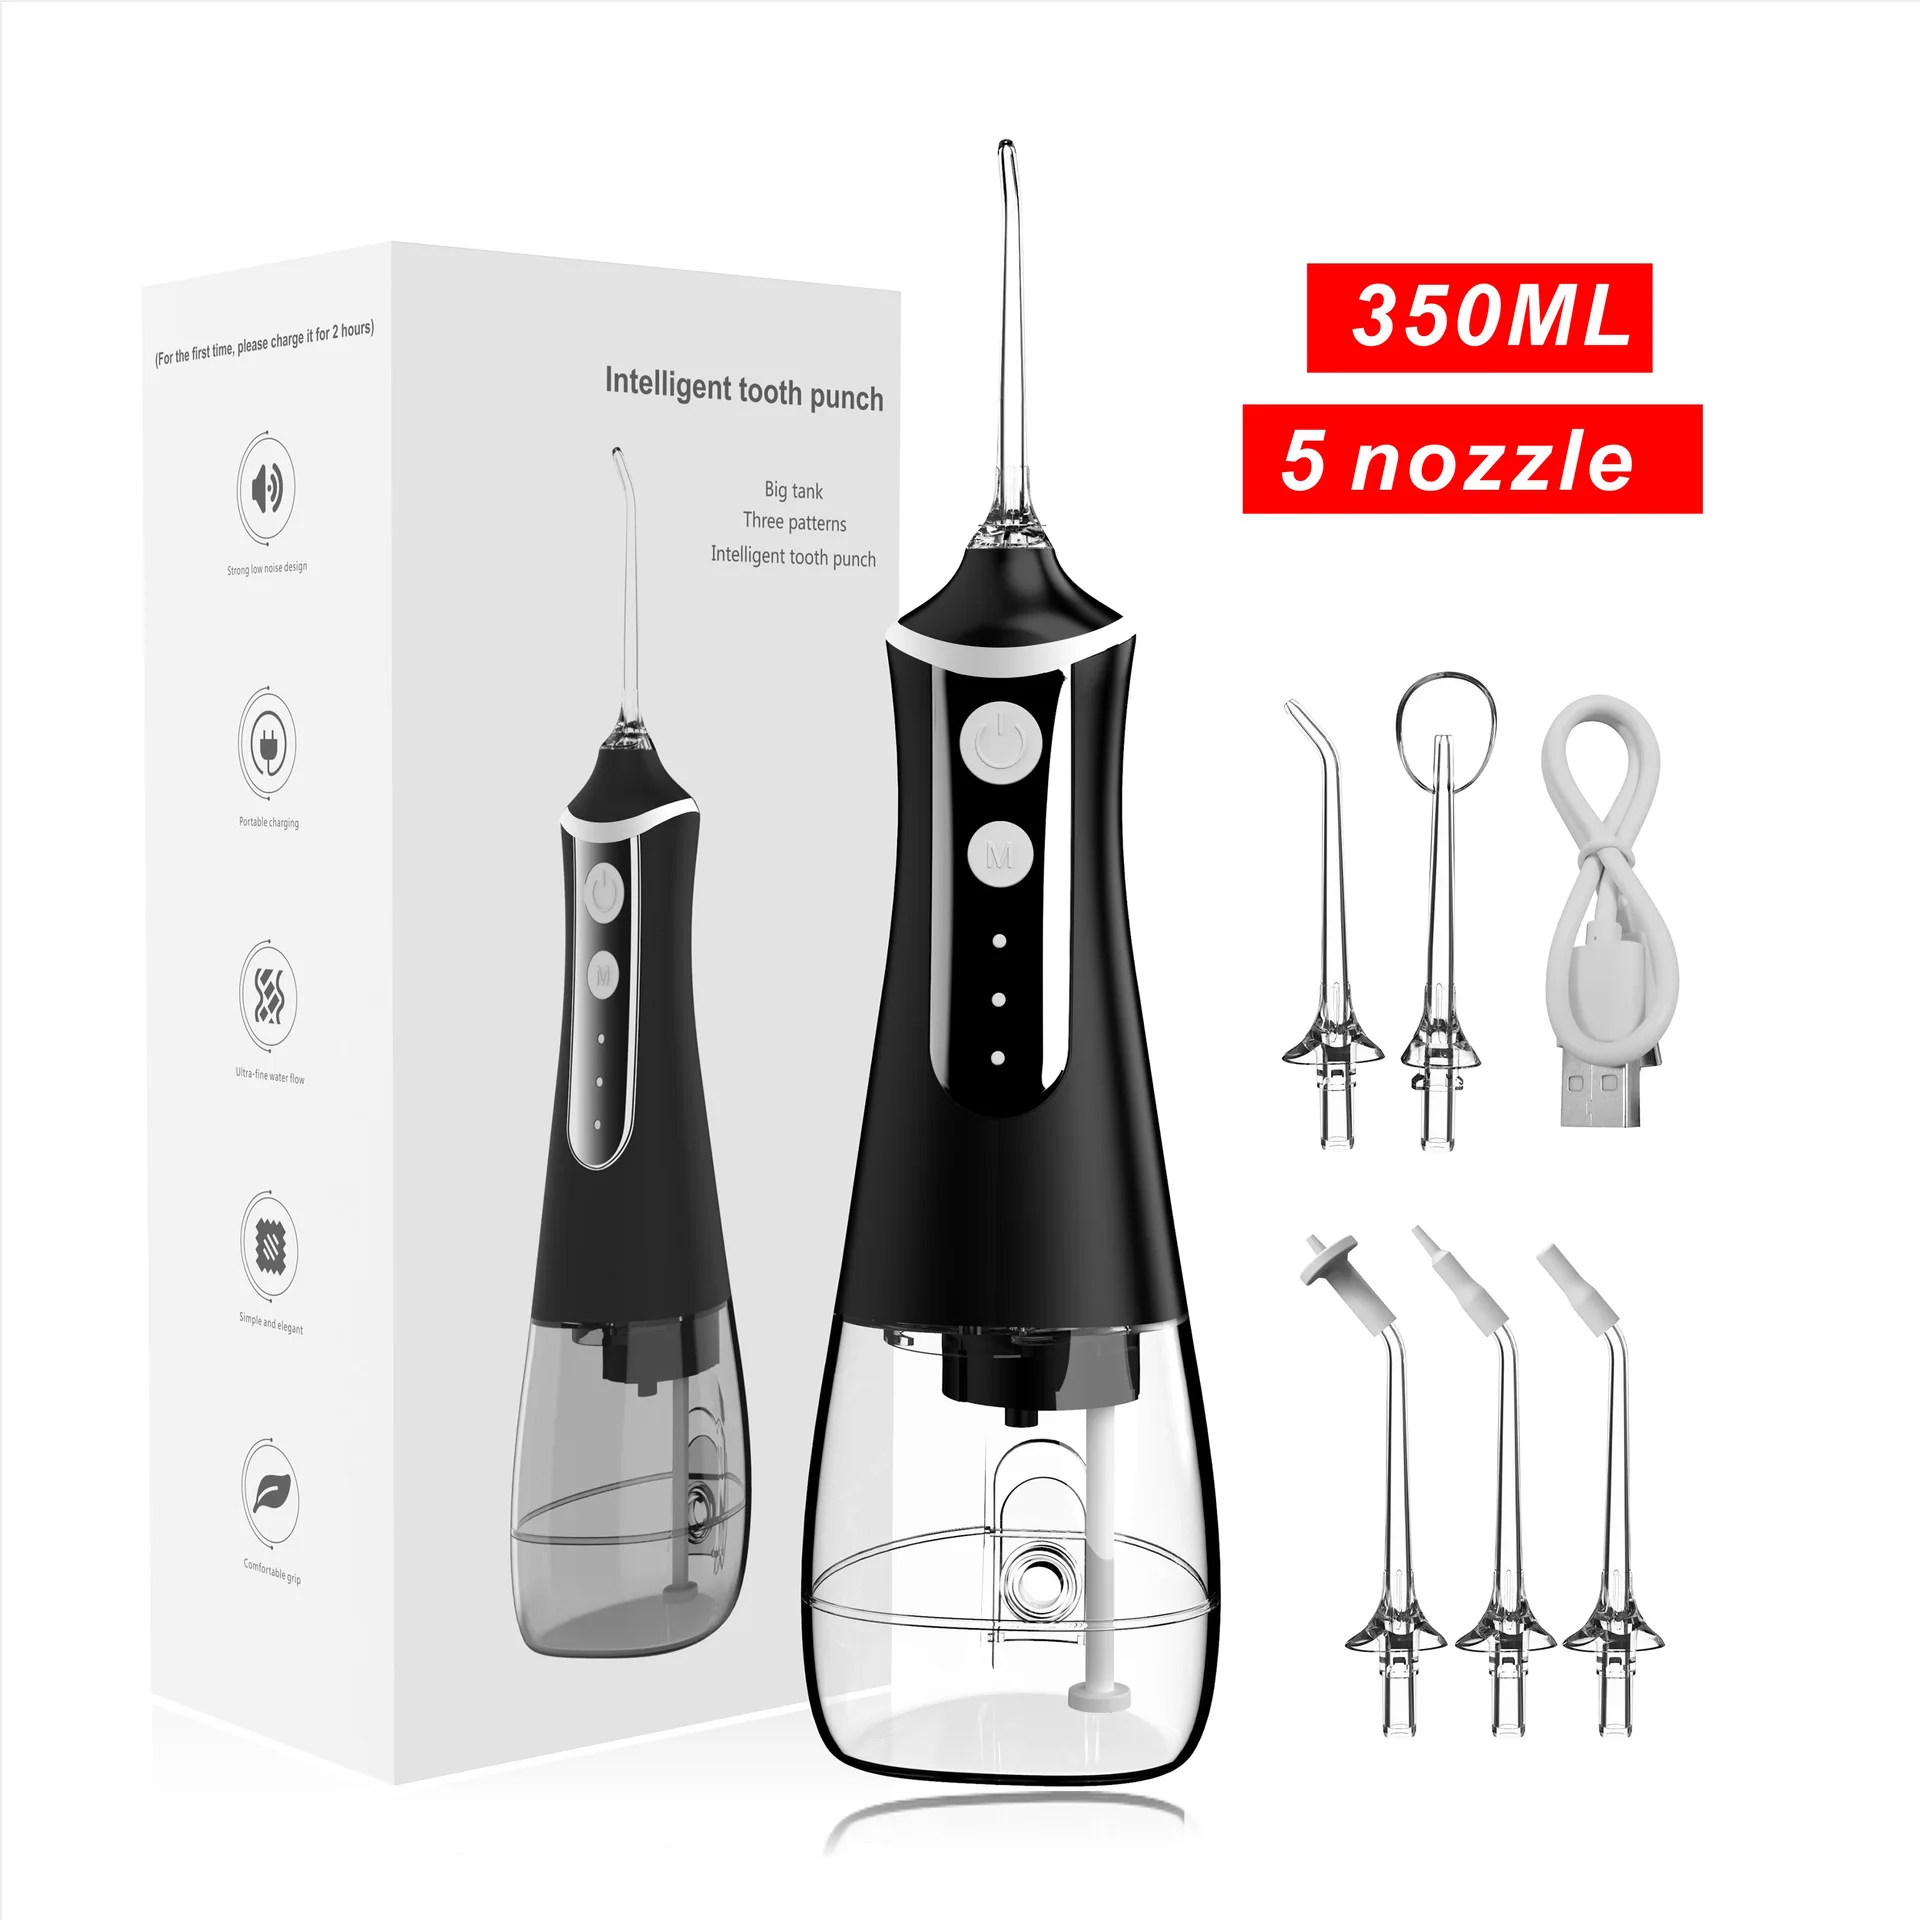 

Portable Oral Irrigator 3 Modes Water Flosser USB Rechargeable 5 Nozzles Dental Water Jet 300ml Water Tank IPX7 Waterproof